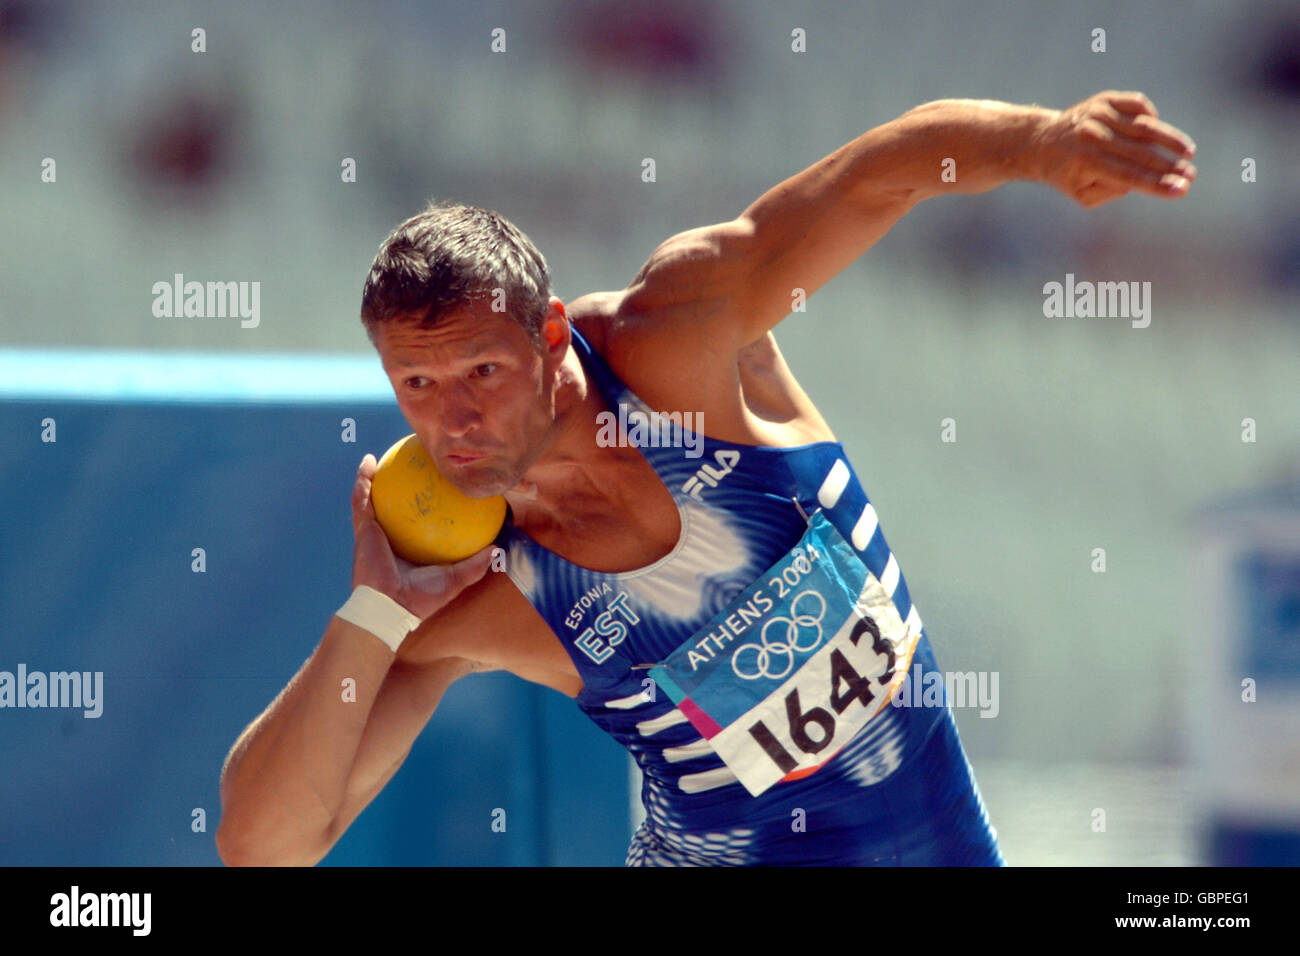 Athletics - Athens Olympic Games 2004 